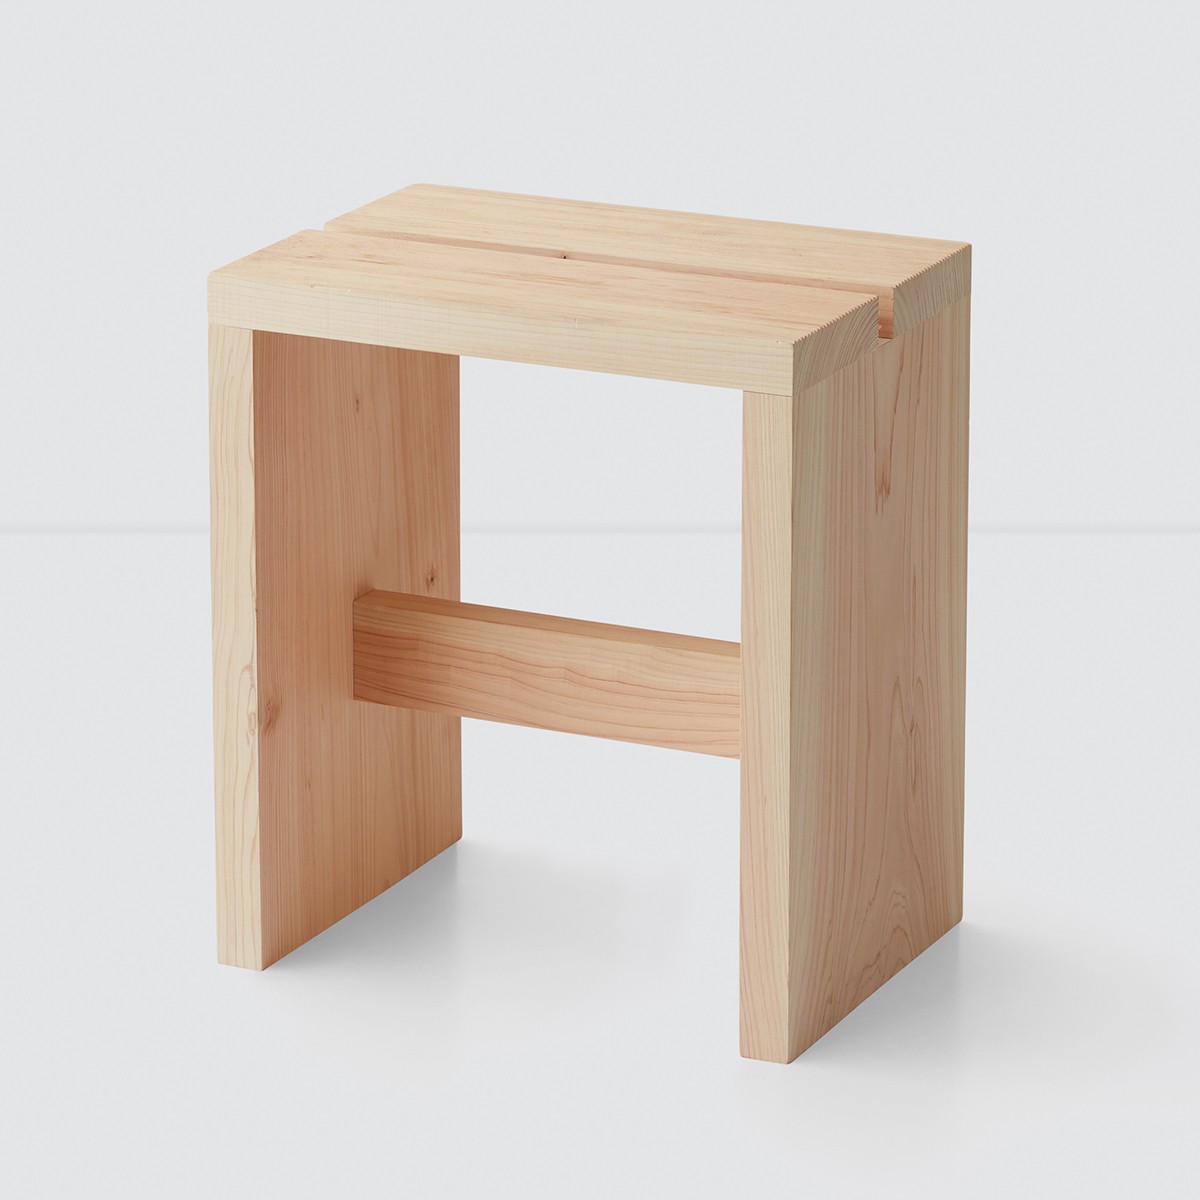 https://www.containerstore.com/catalogimages/499211/10096056-Hinoki_Wood_Bath_Stool_Larg.jpg